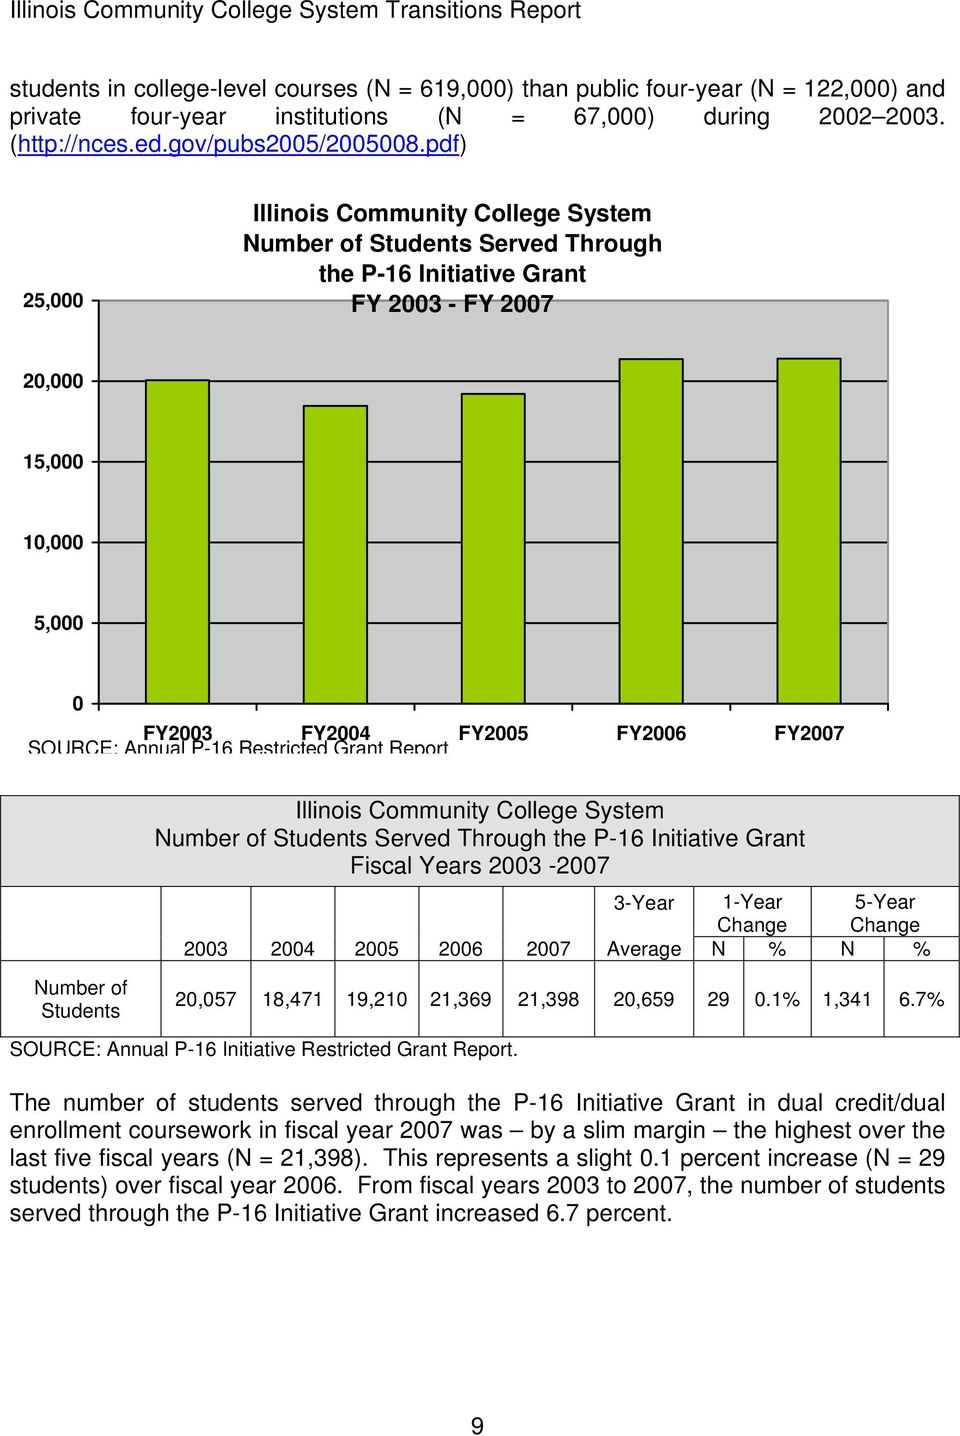 Annual P-16 Restricted Grant Report Number of Students Illinois Community College System Number of Students Served Through the P-16 Initiative Grant Fiscal Years 2003-2007 2003 2004 2005 2006 2007